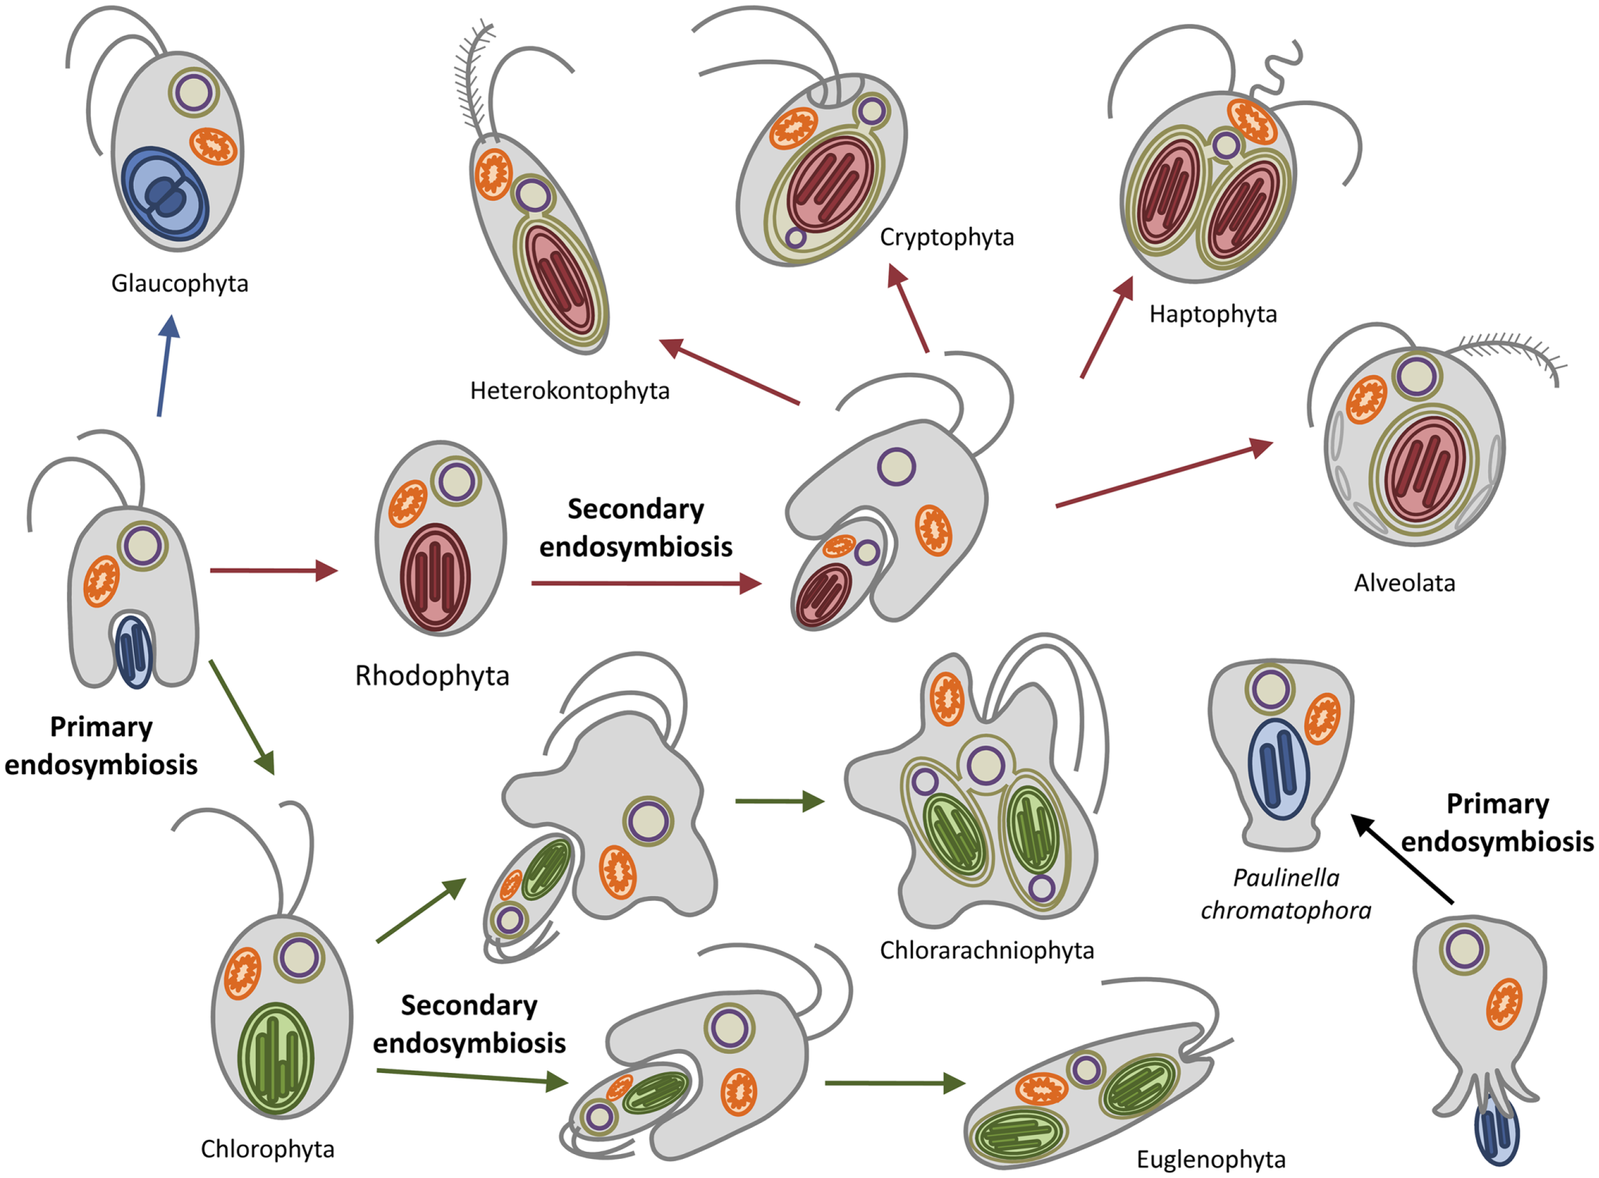 Diagram of endosymbiotic events. Primary endosymbiosis occurs twice. Secondary endosymbiosis occurs once from red aglae and twice from green algae.